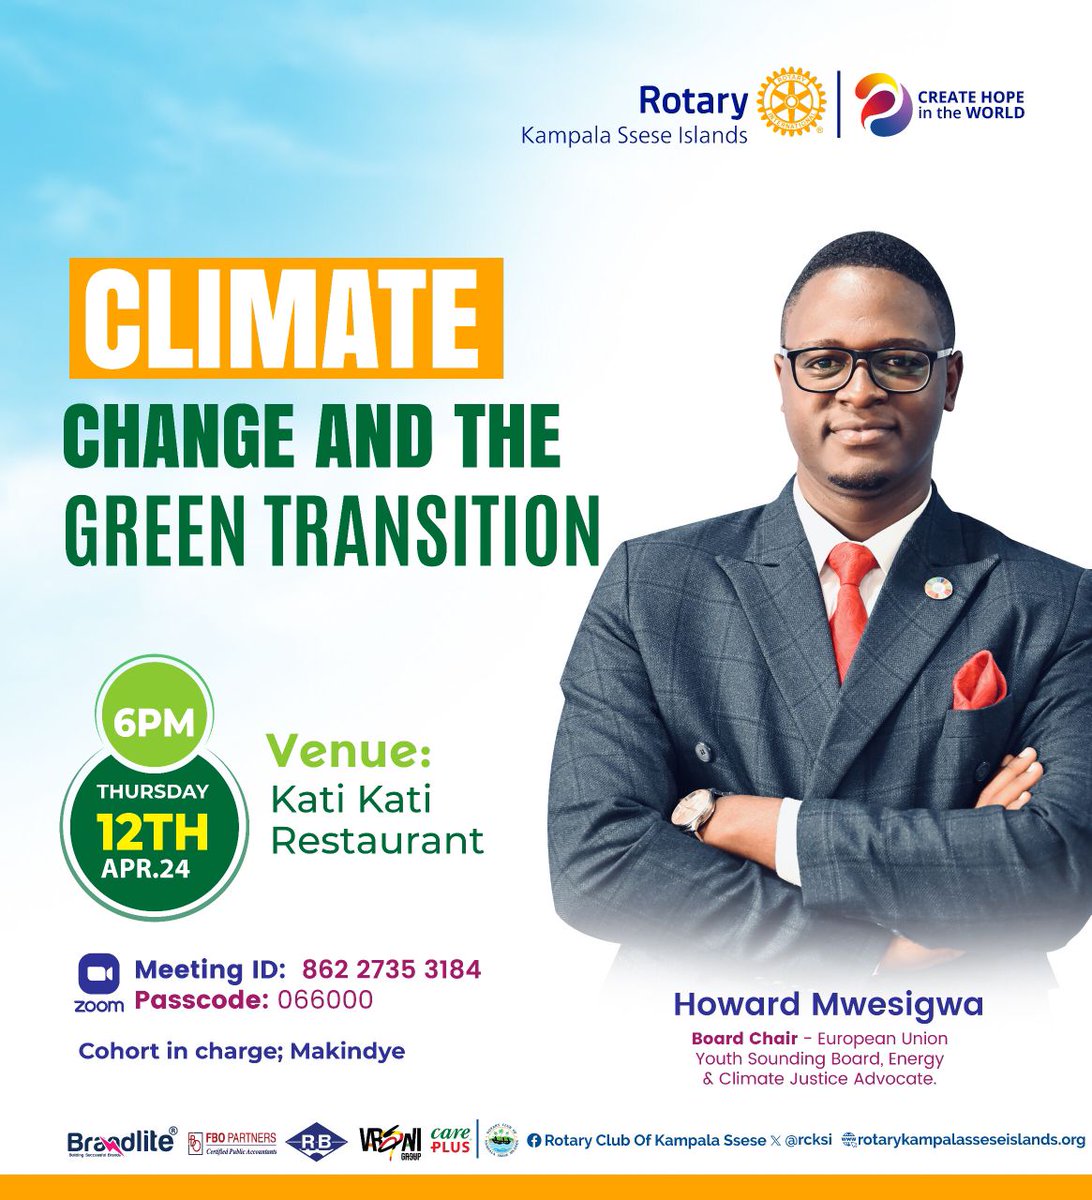 Today At Ssese: Join us for an enlightening Talk about the Future as we discuss Climate Change and The Green Transition. You can’t miss the opportunity to explore sustainable solutions for a better tomorrow